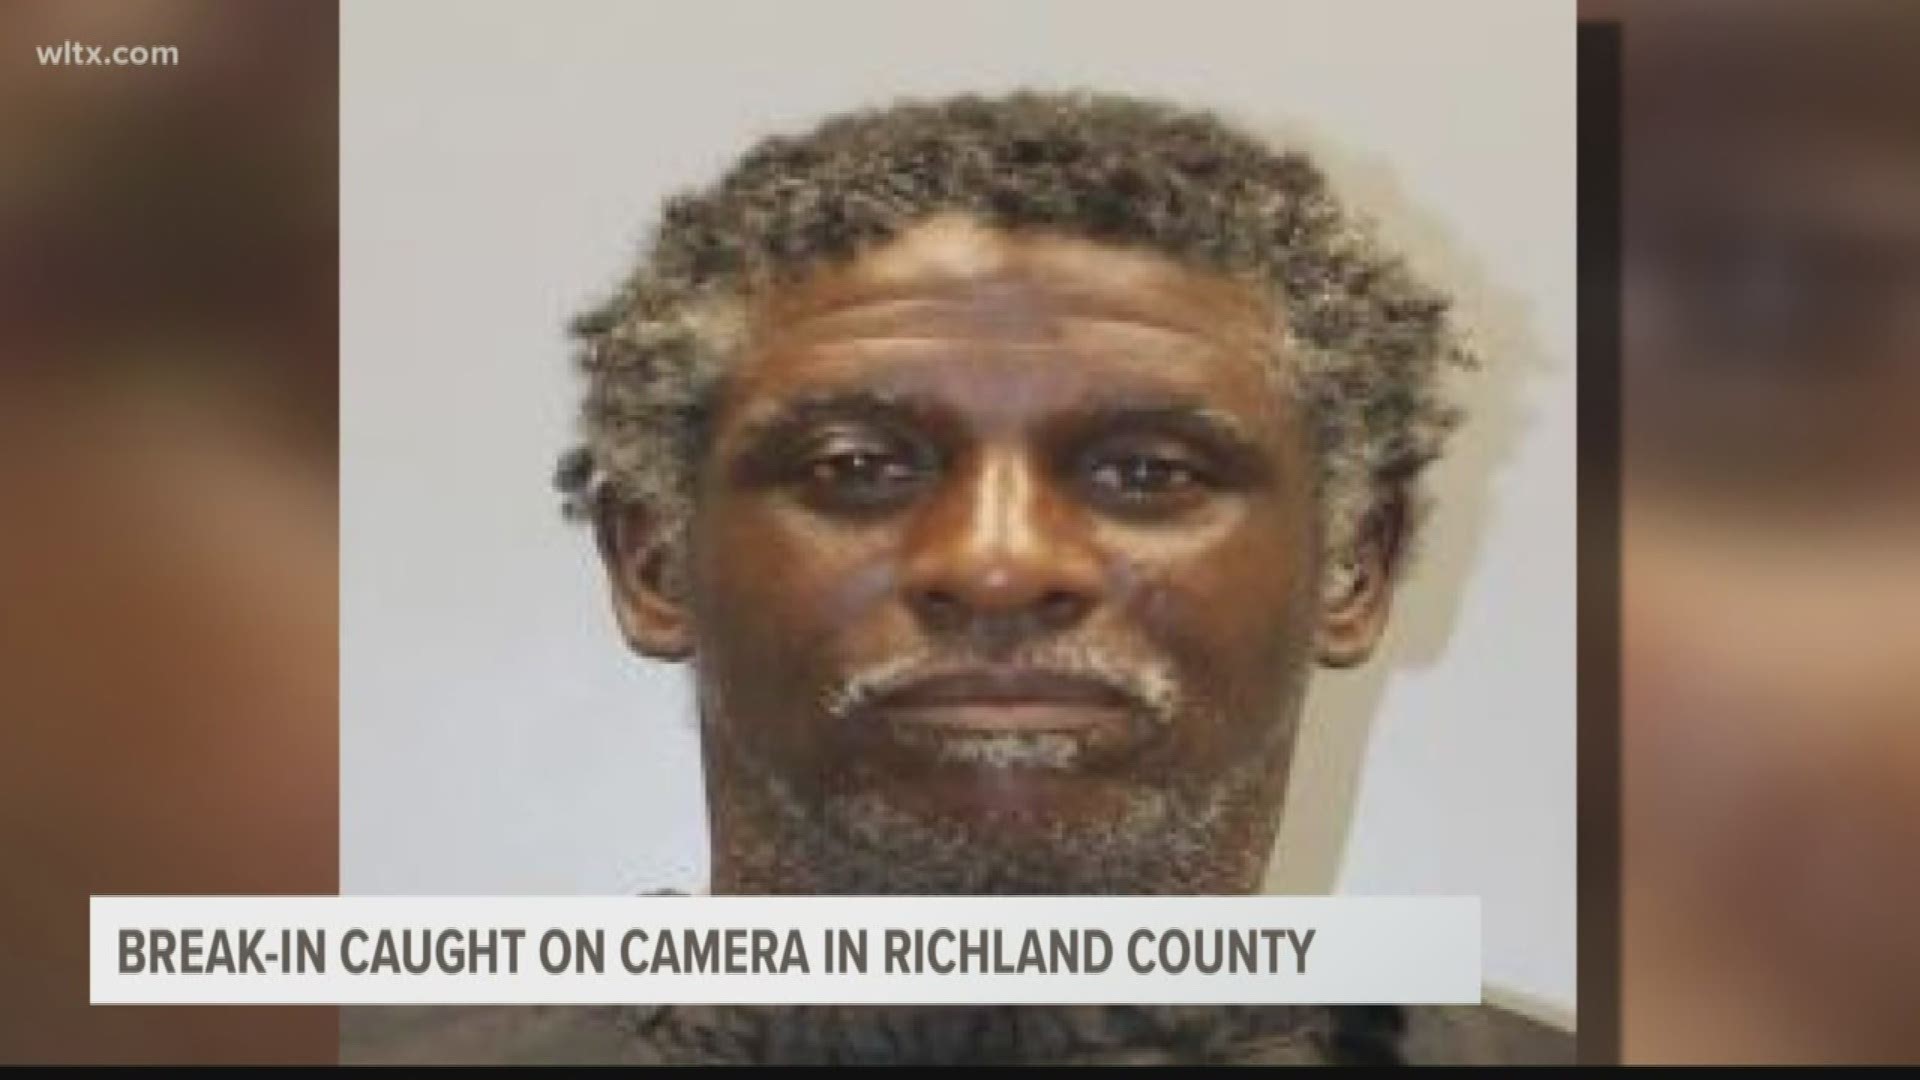 Richland Deputies say this man is Reginel Wroten and he broke into a home on Lochmore drive.